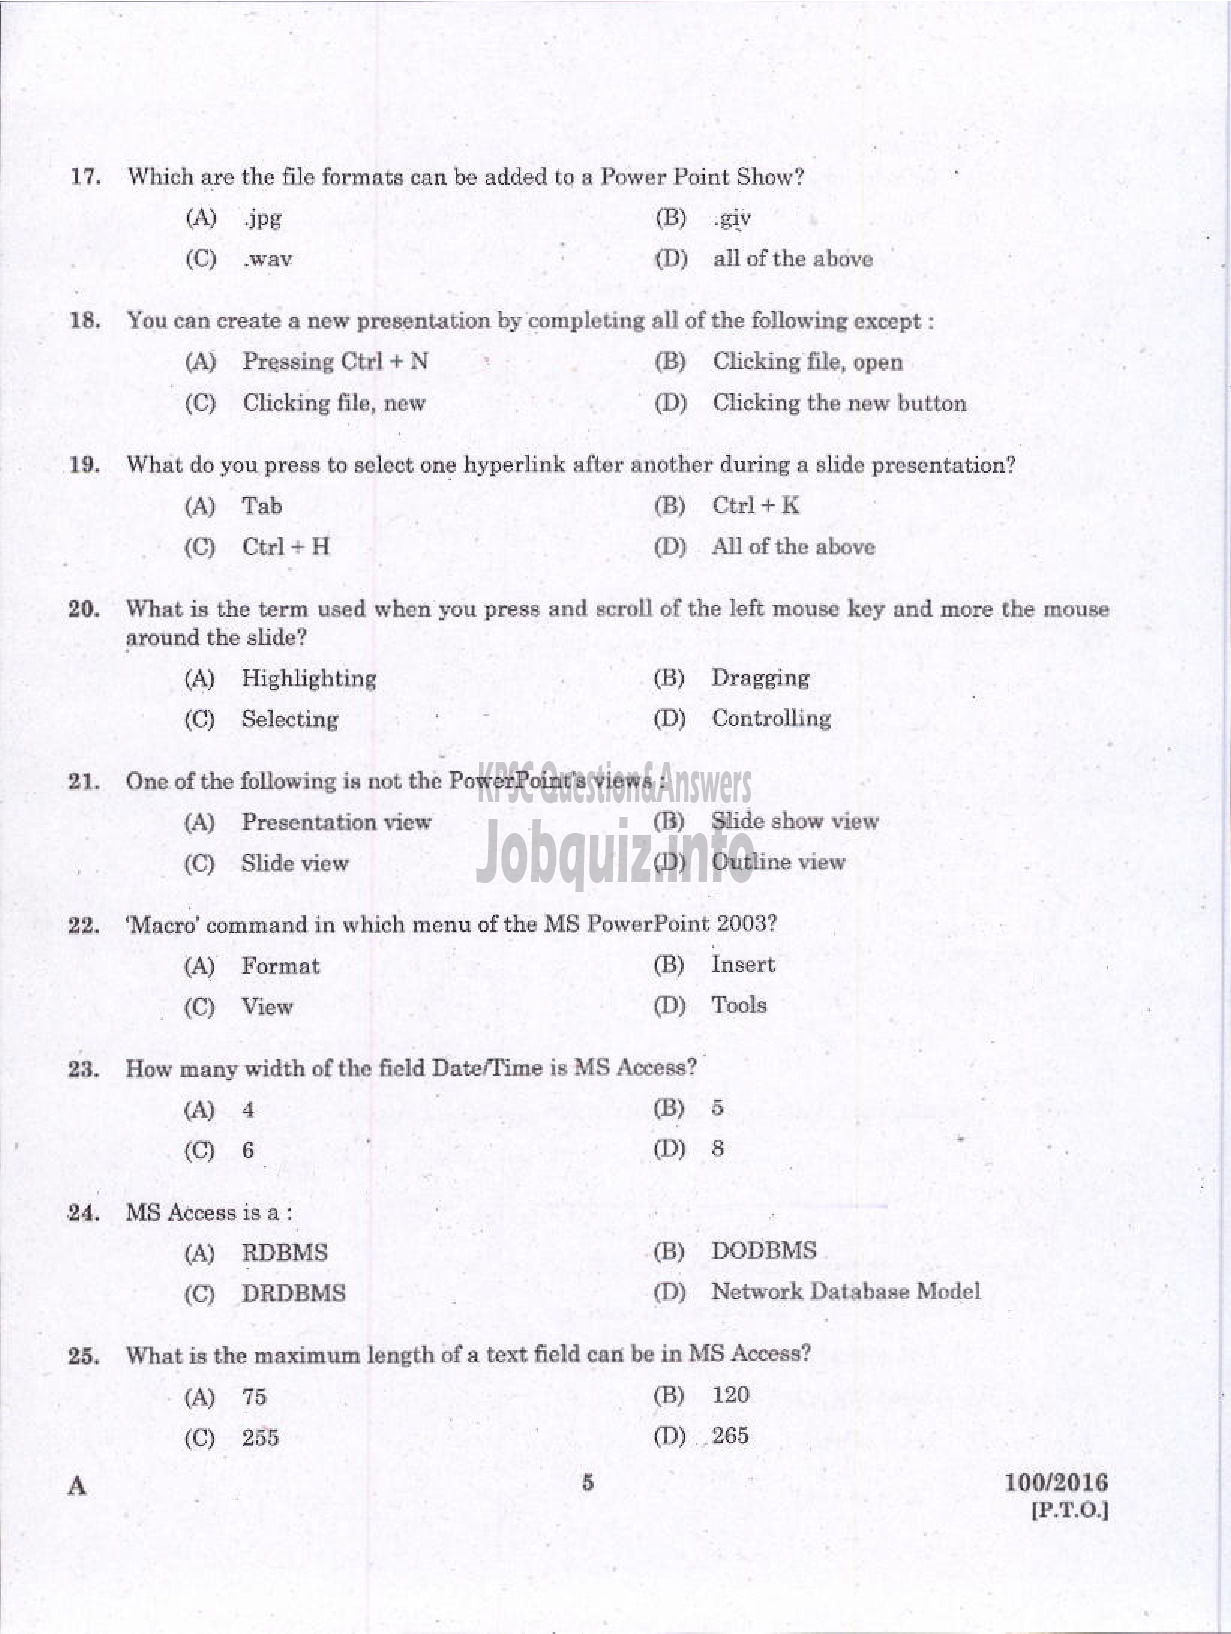 Kerala PSC Question Paper - DATA ENTRY OPERATOR DCB-3